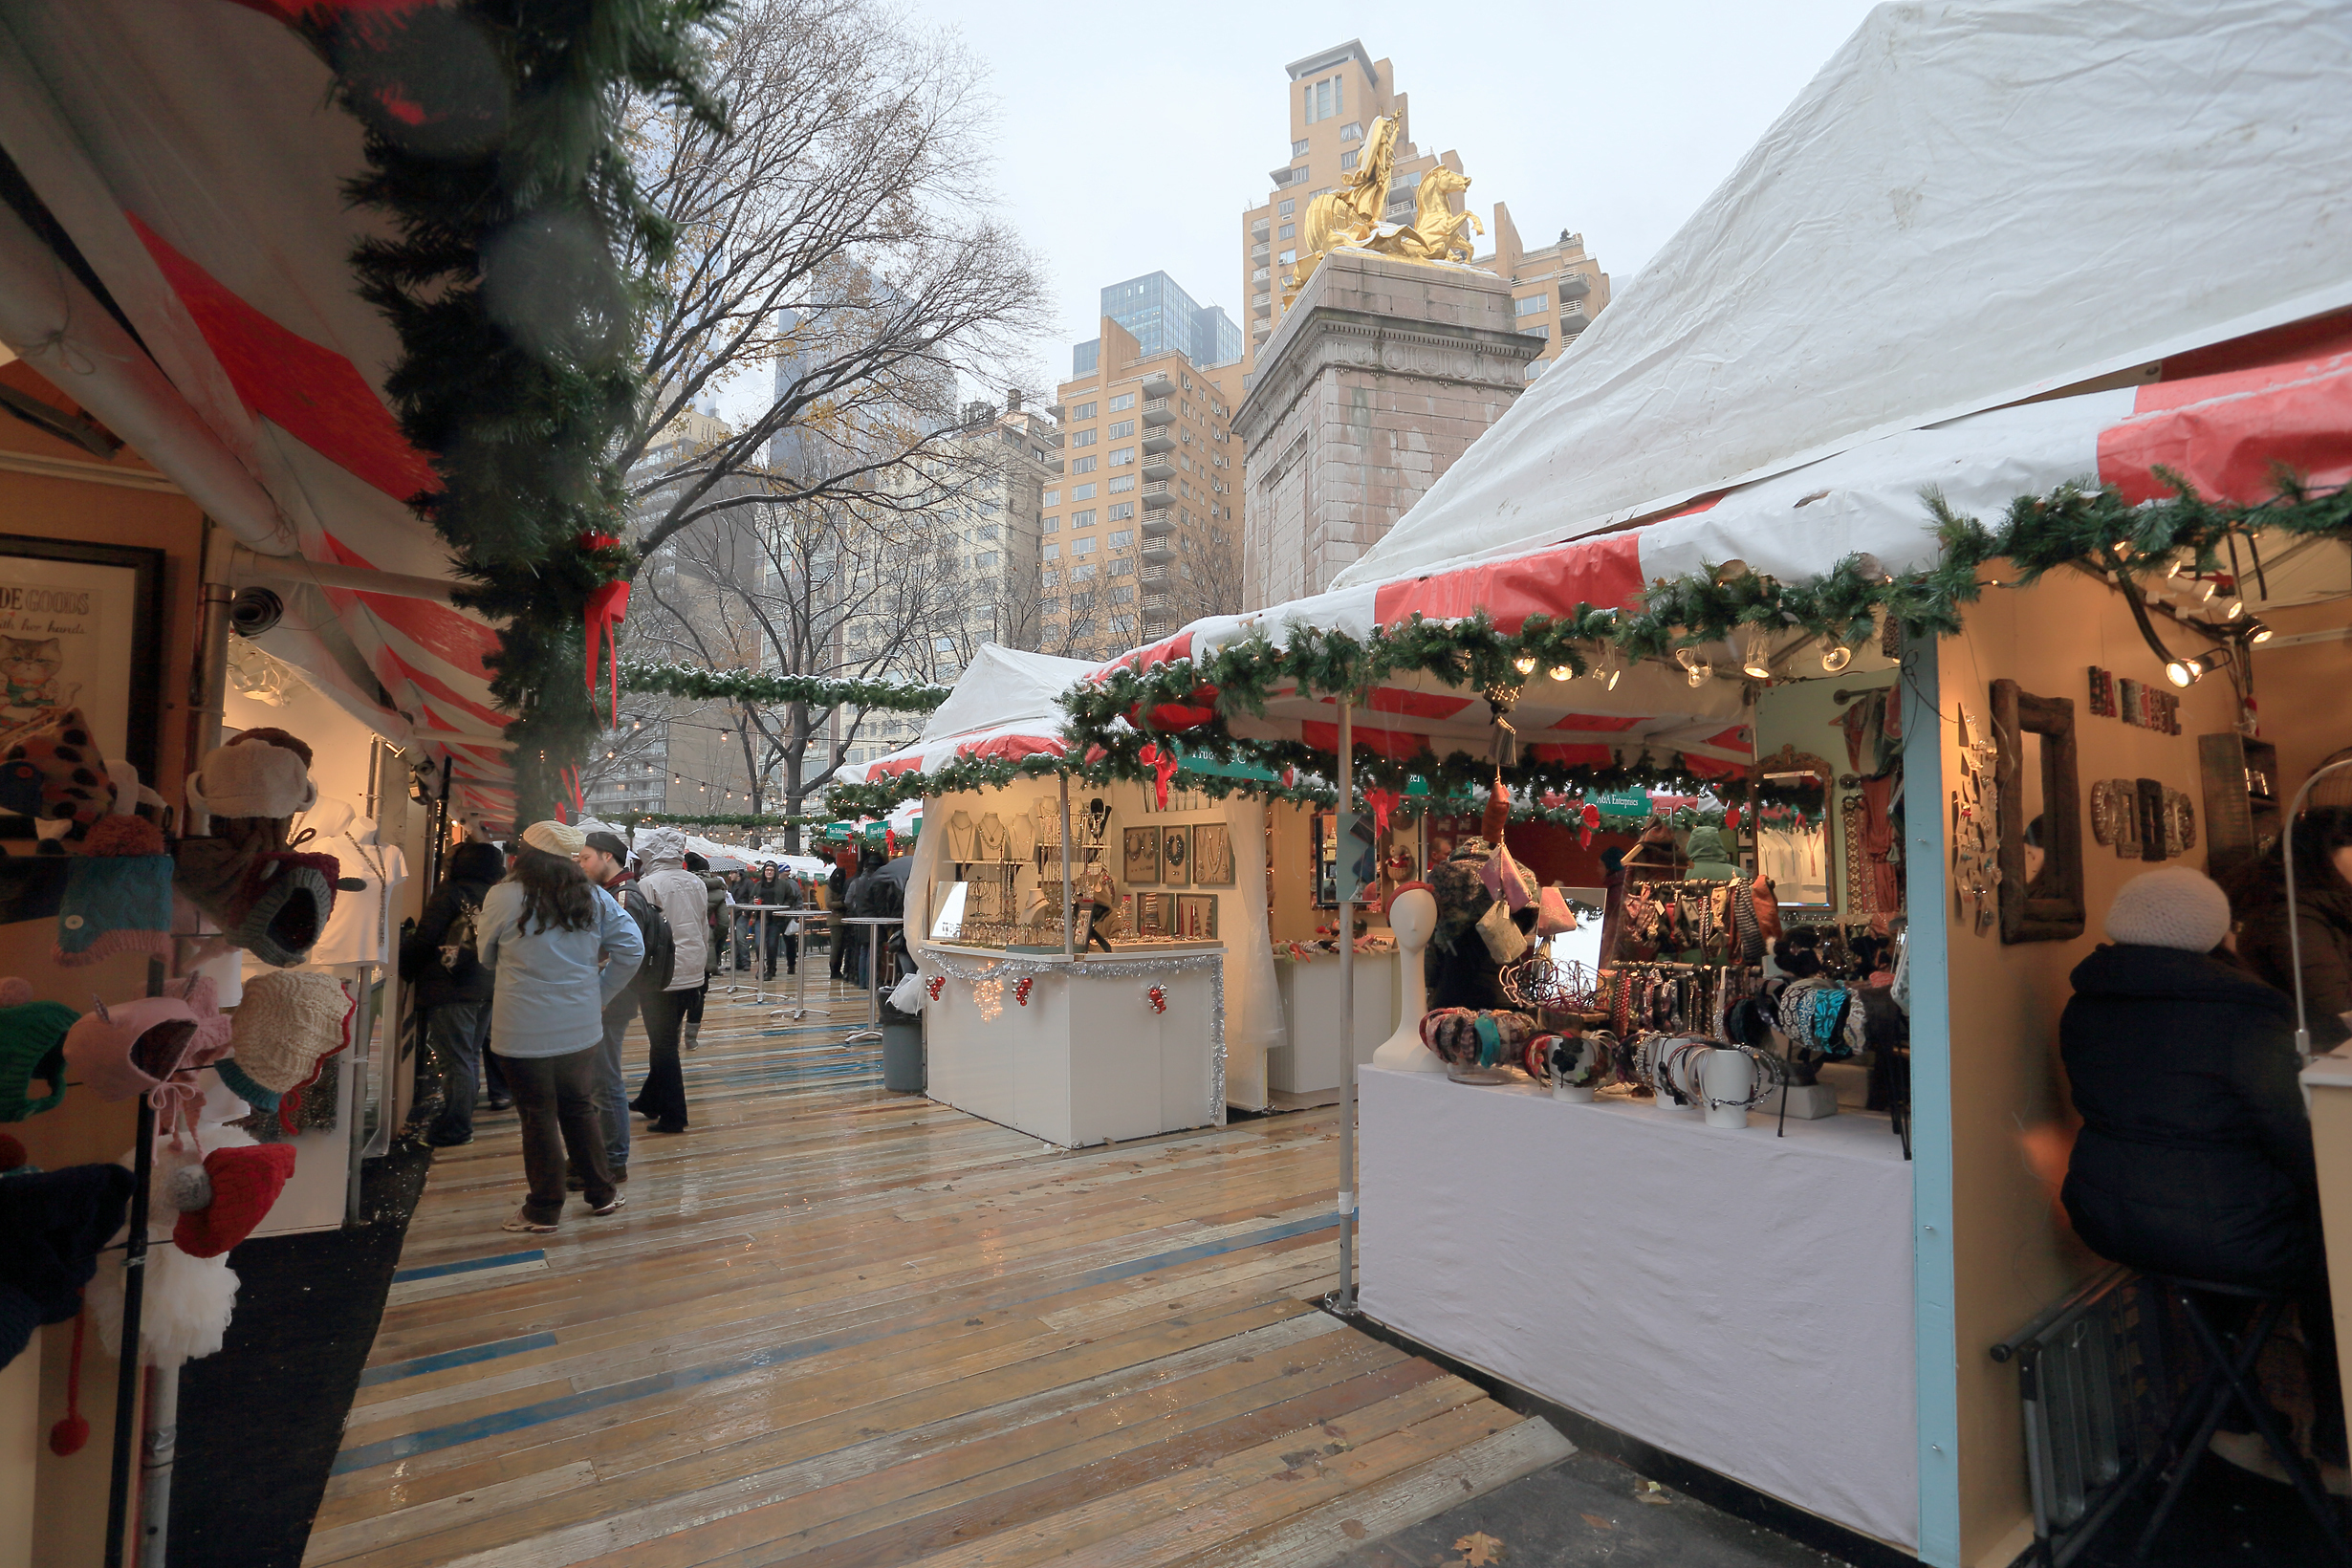 A holiday market in New York City. There are various market stalls with wares. Each stall is decorated with garlands. There are tall city buildings in the background.